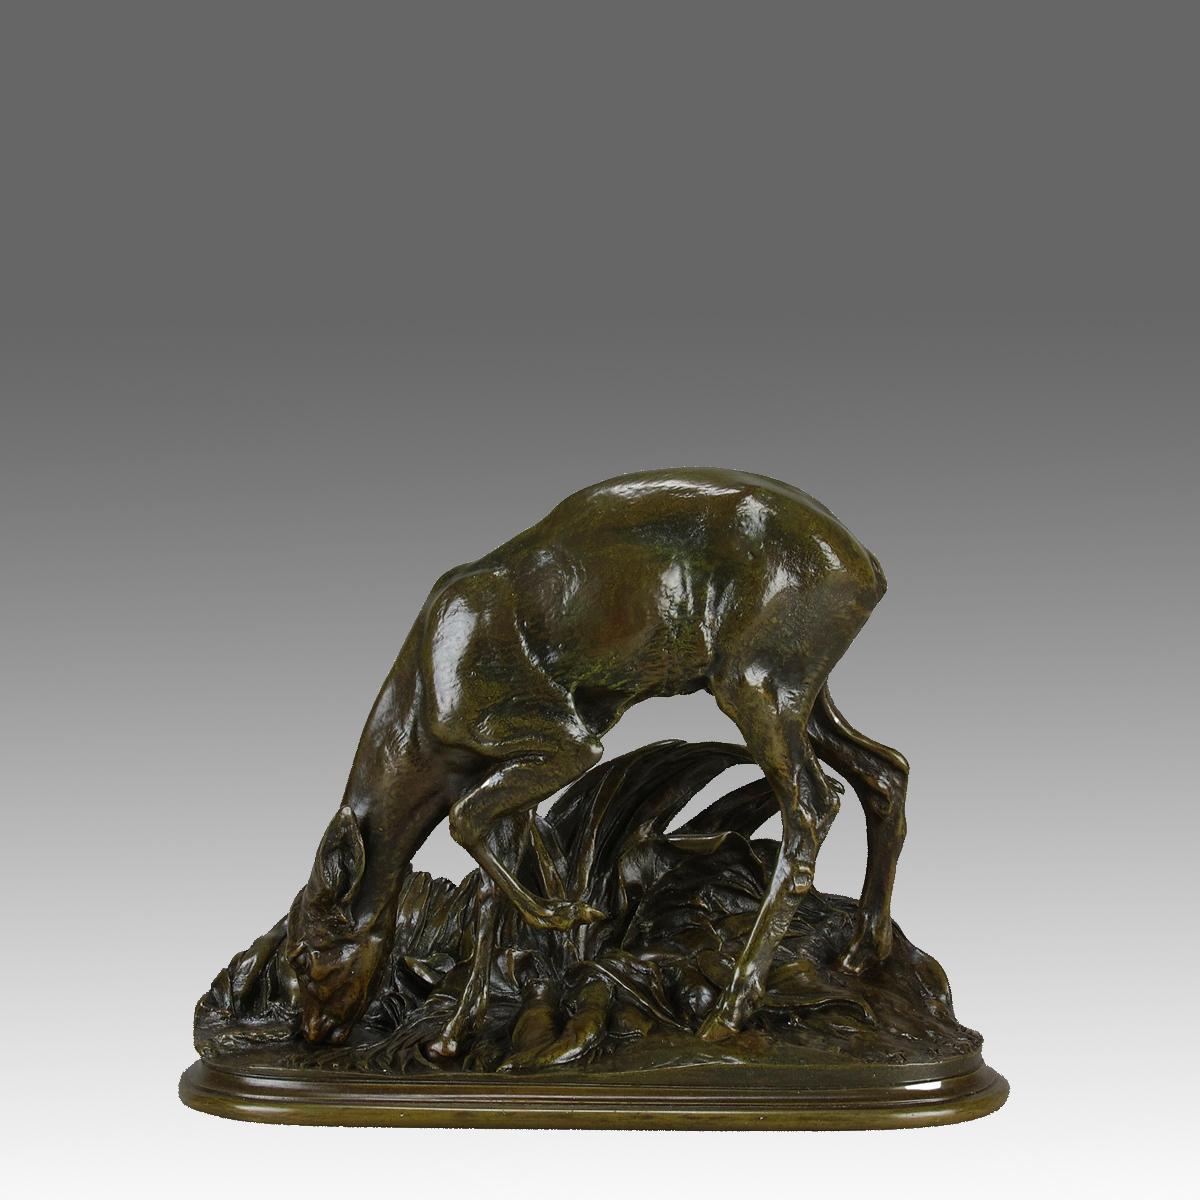 A very rare mid 19th Century Animalier bronze study of a doe drinking by the side of a lake, the bronze with fabulous rich brown patina and very fine hand chased surface detail, raised on naturalistic base. Signed P J Mêne﻿, inscribed ﻿Susse Freres